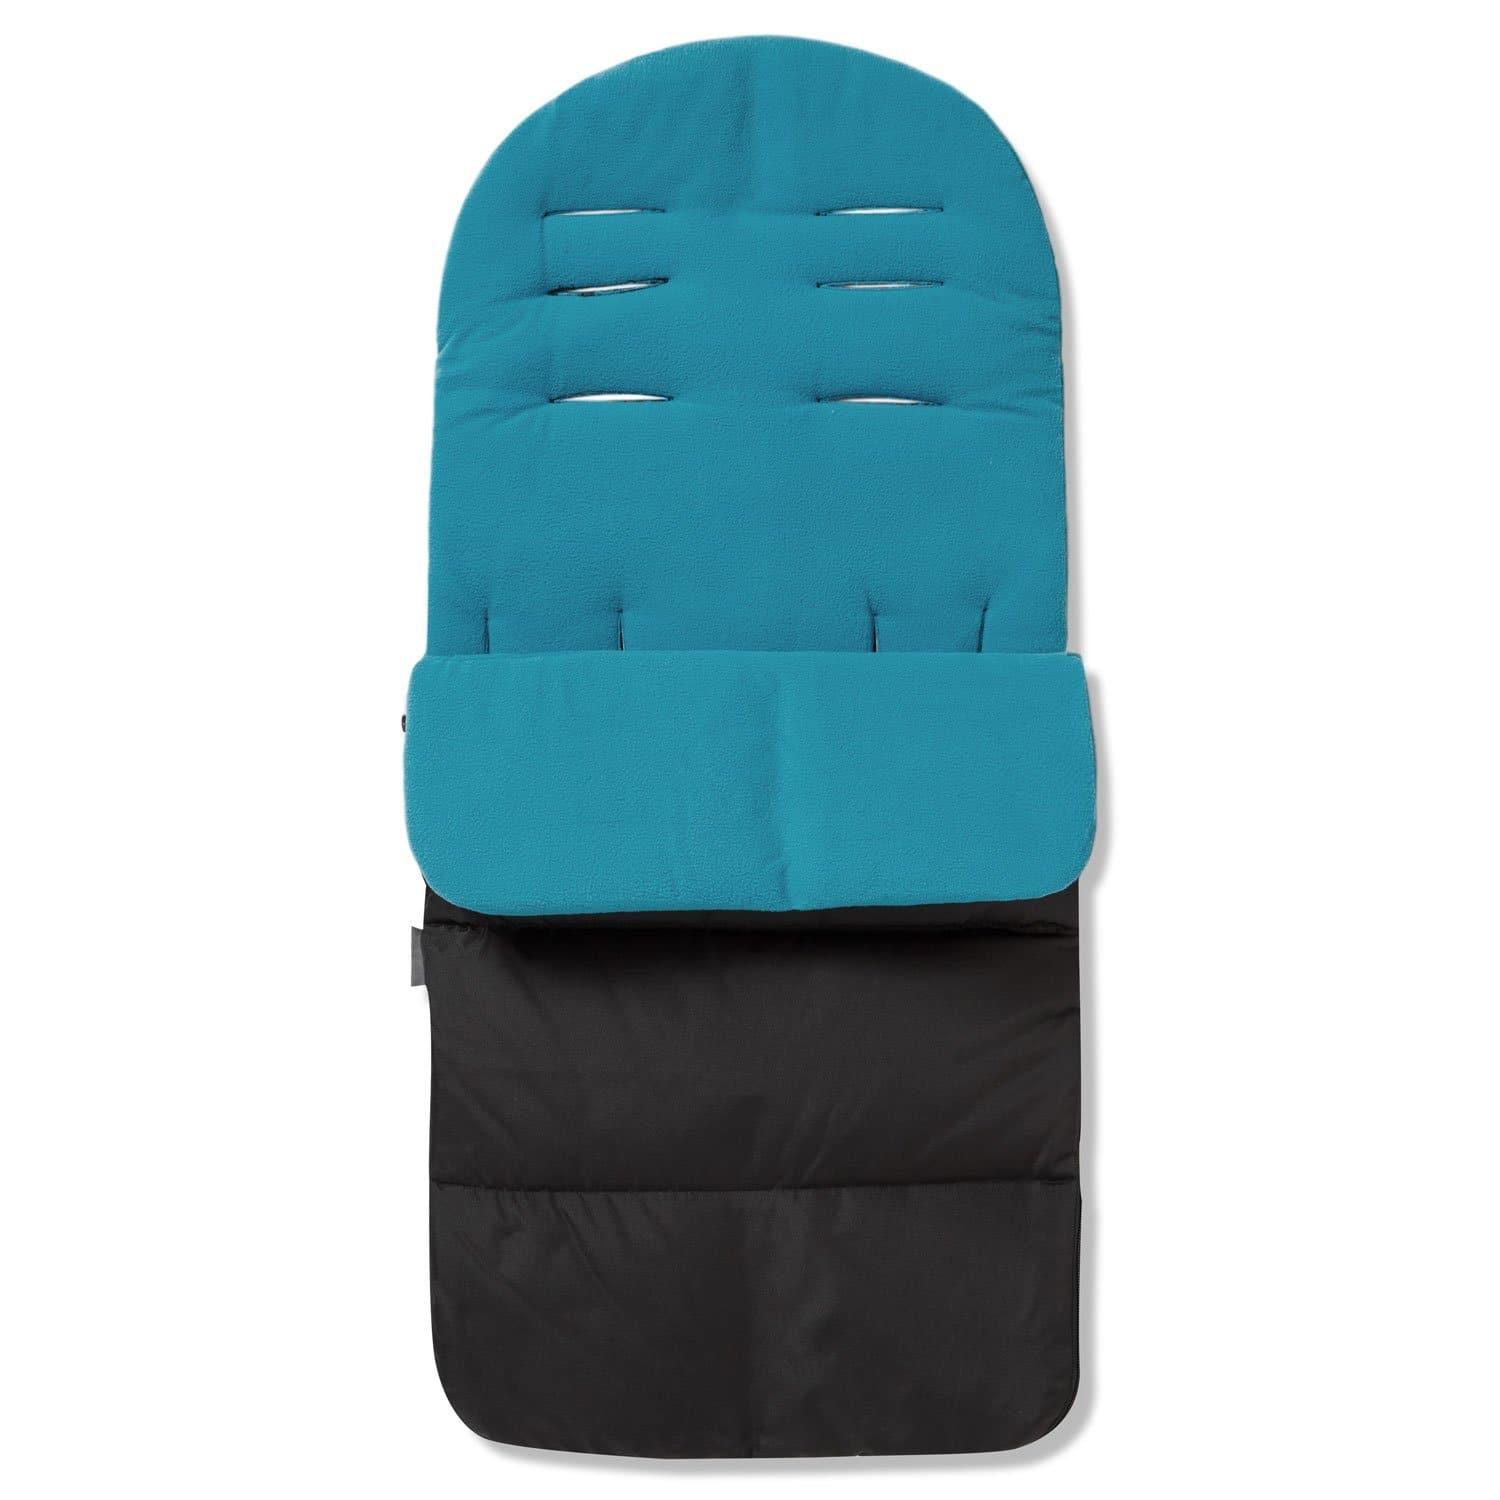 Premium Footmuff / Cosy Toes Compatible with Babybus - Ocean Blue / Fits All Models | For Your Little One